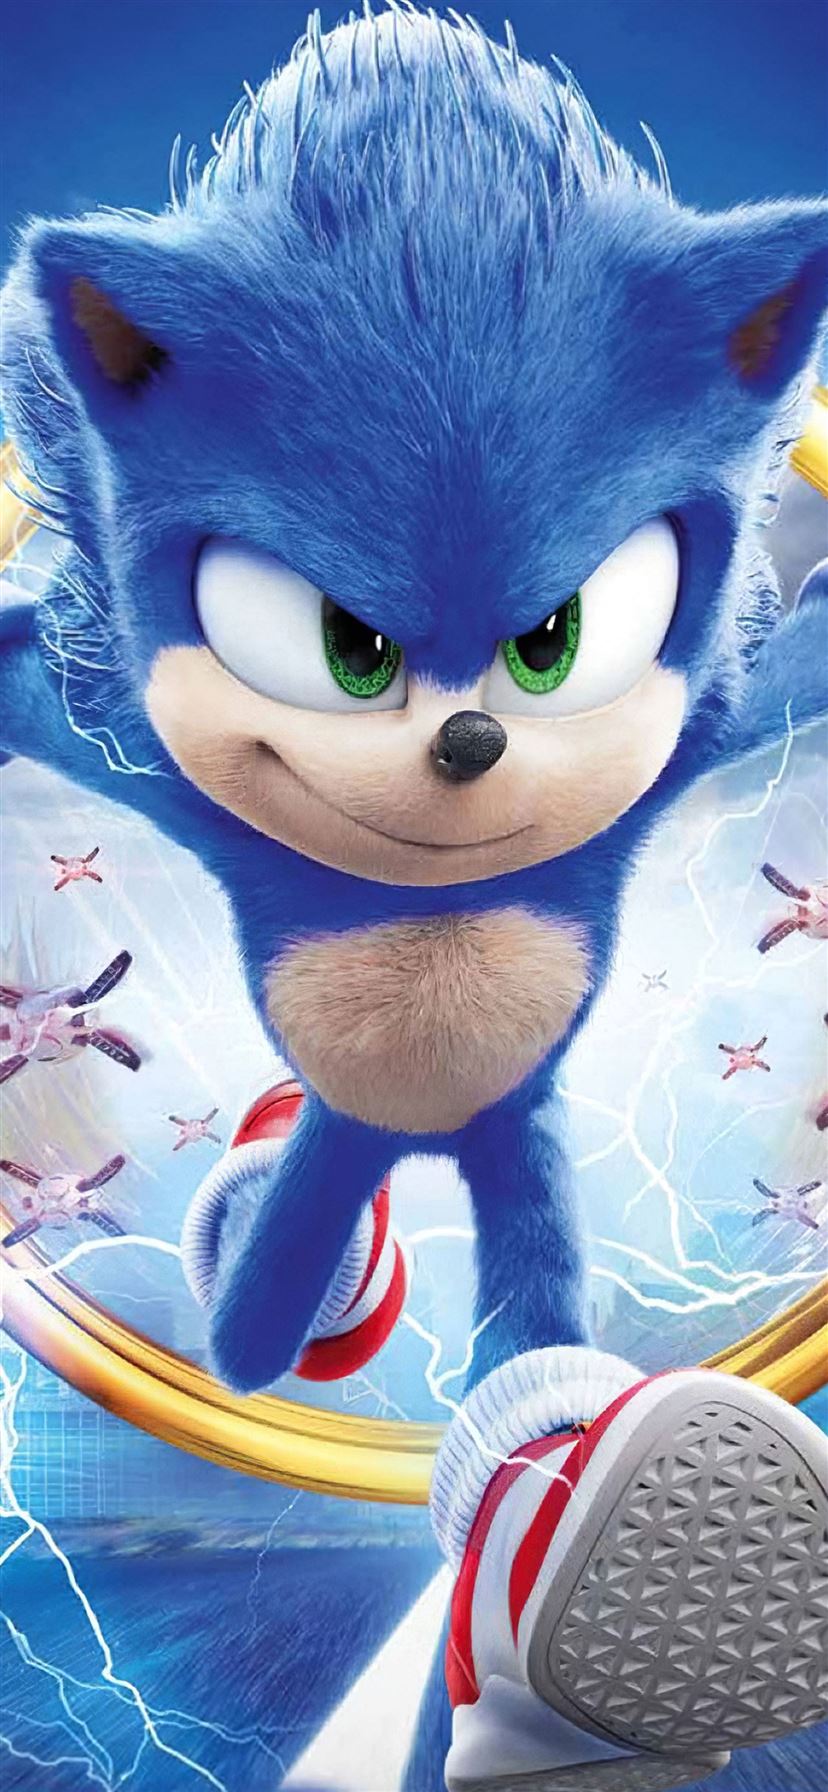 sonic the hedgehog movie new iPhone 11 Wallpaper Free Download